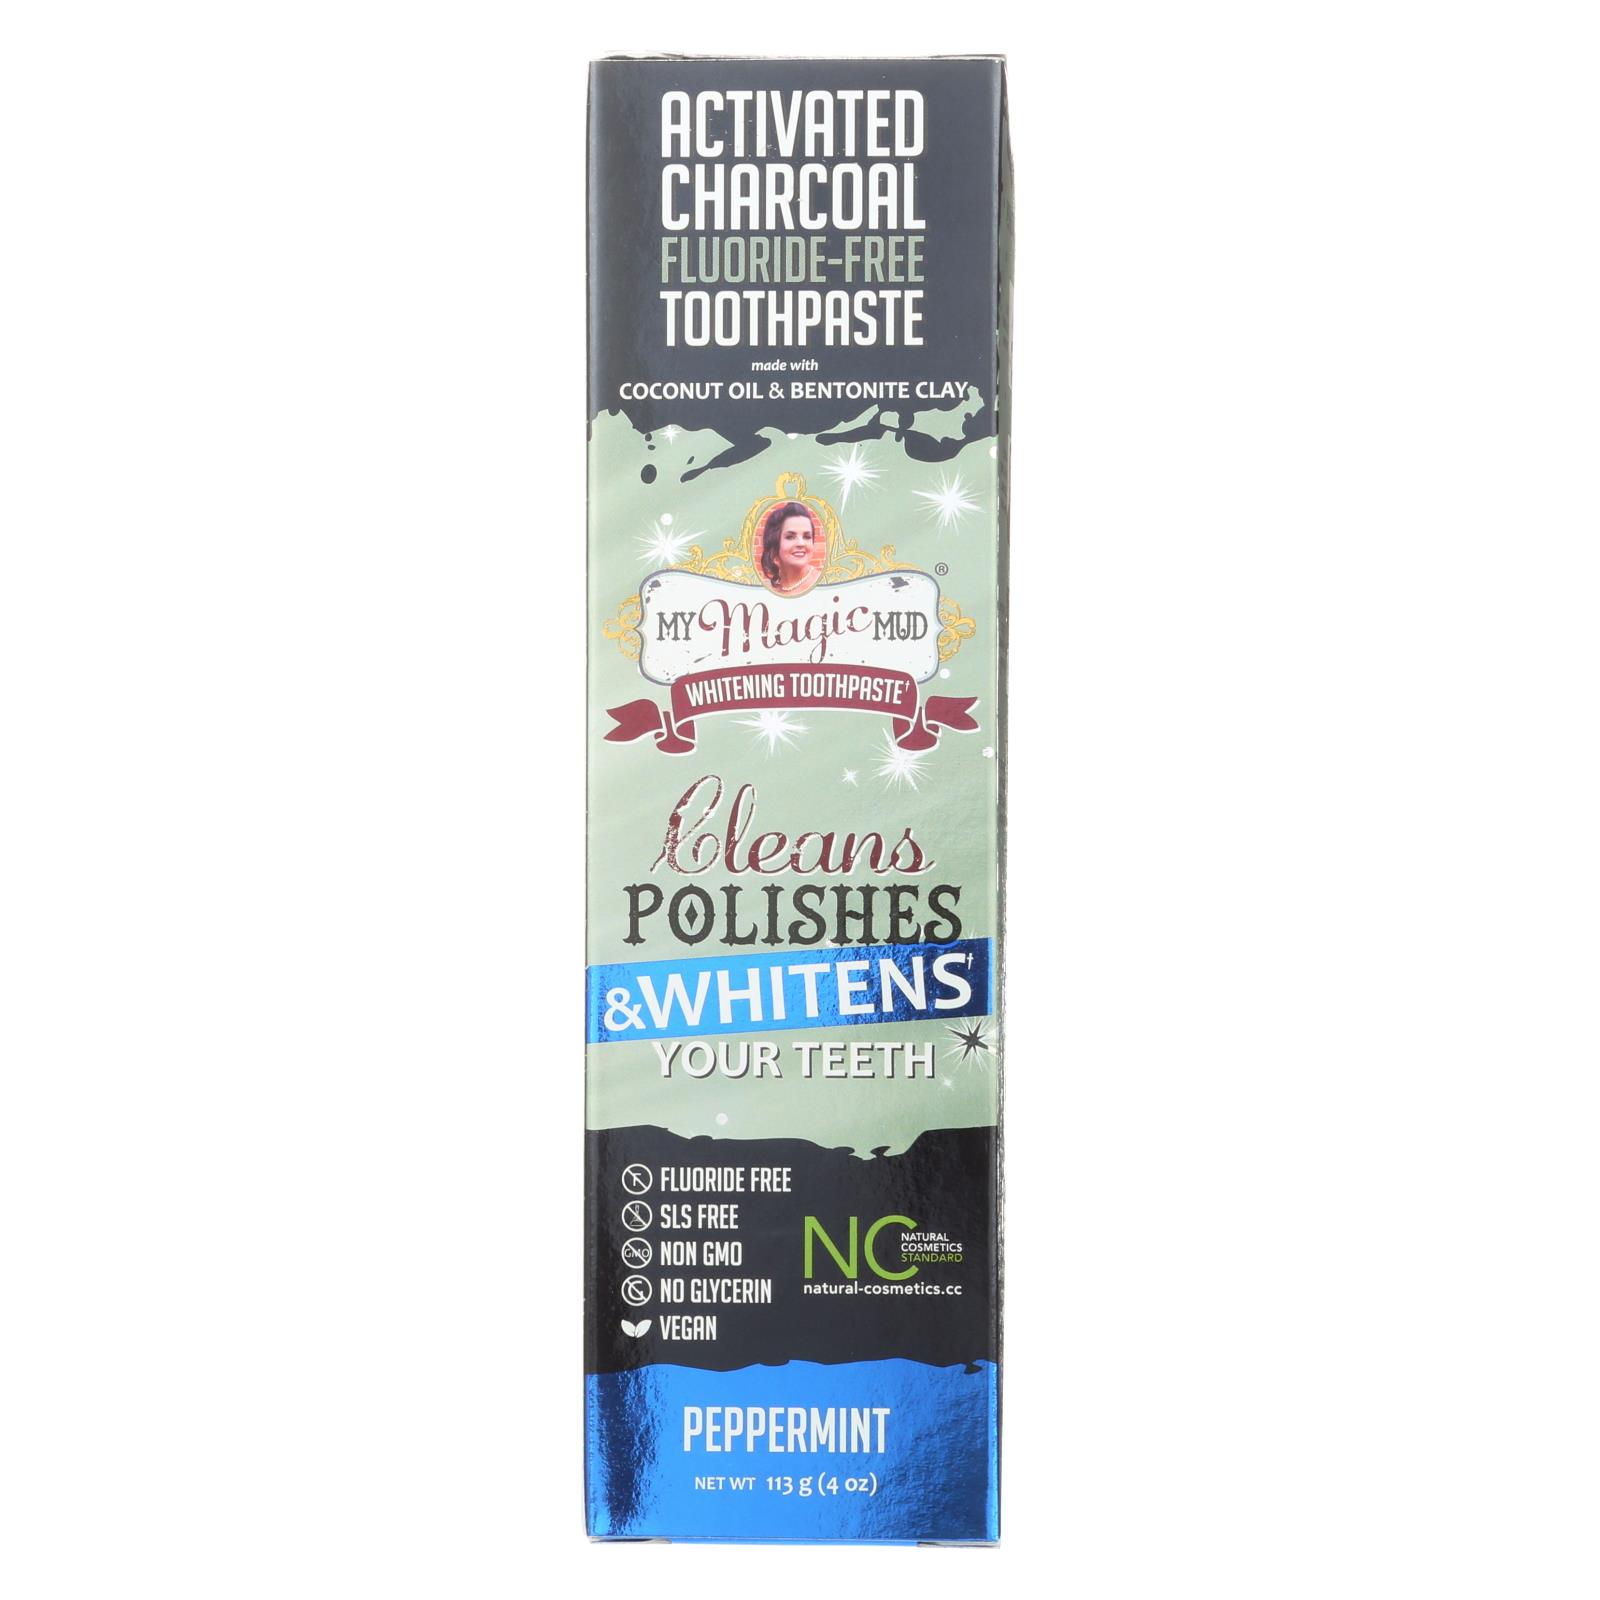 My Magic Mud - Toothpaste Ppmnt Whitning - 1 Each - 4 OZ